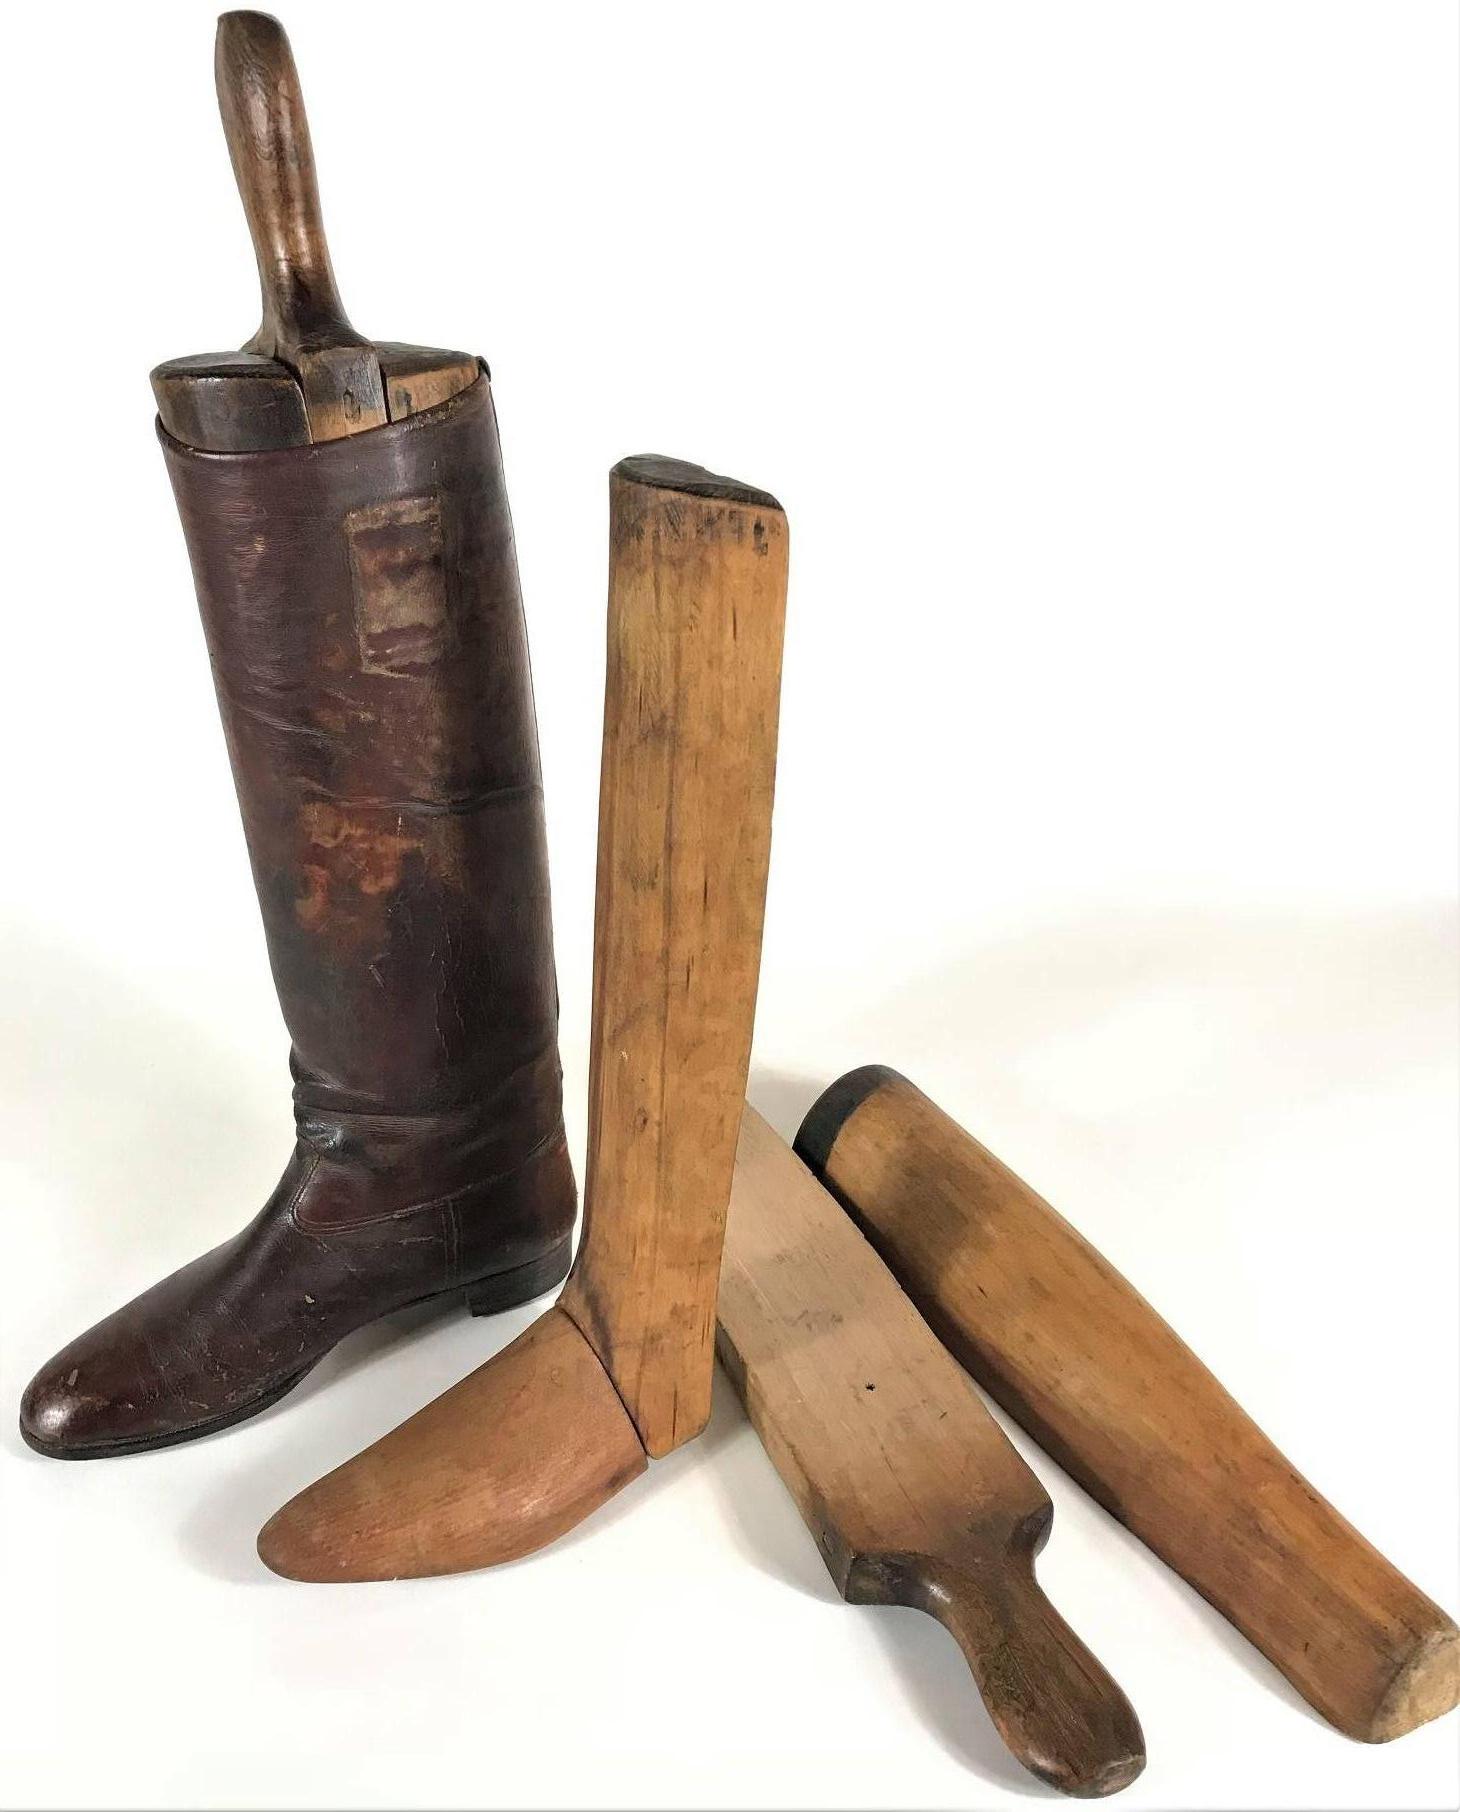 A pair of exquisite decorative brown leather riding boots made by Austrian Imperial shoemaker Scheer - Purveyor of the imperial and royal court of the Austrian and Hungarian empire.
The title purveyor to the imperial and royal court of the Austrian